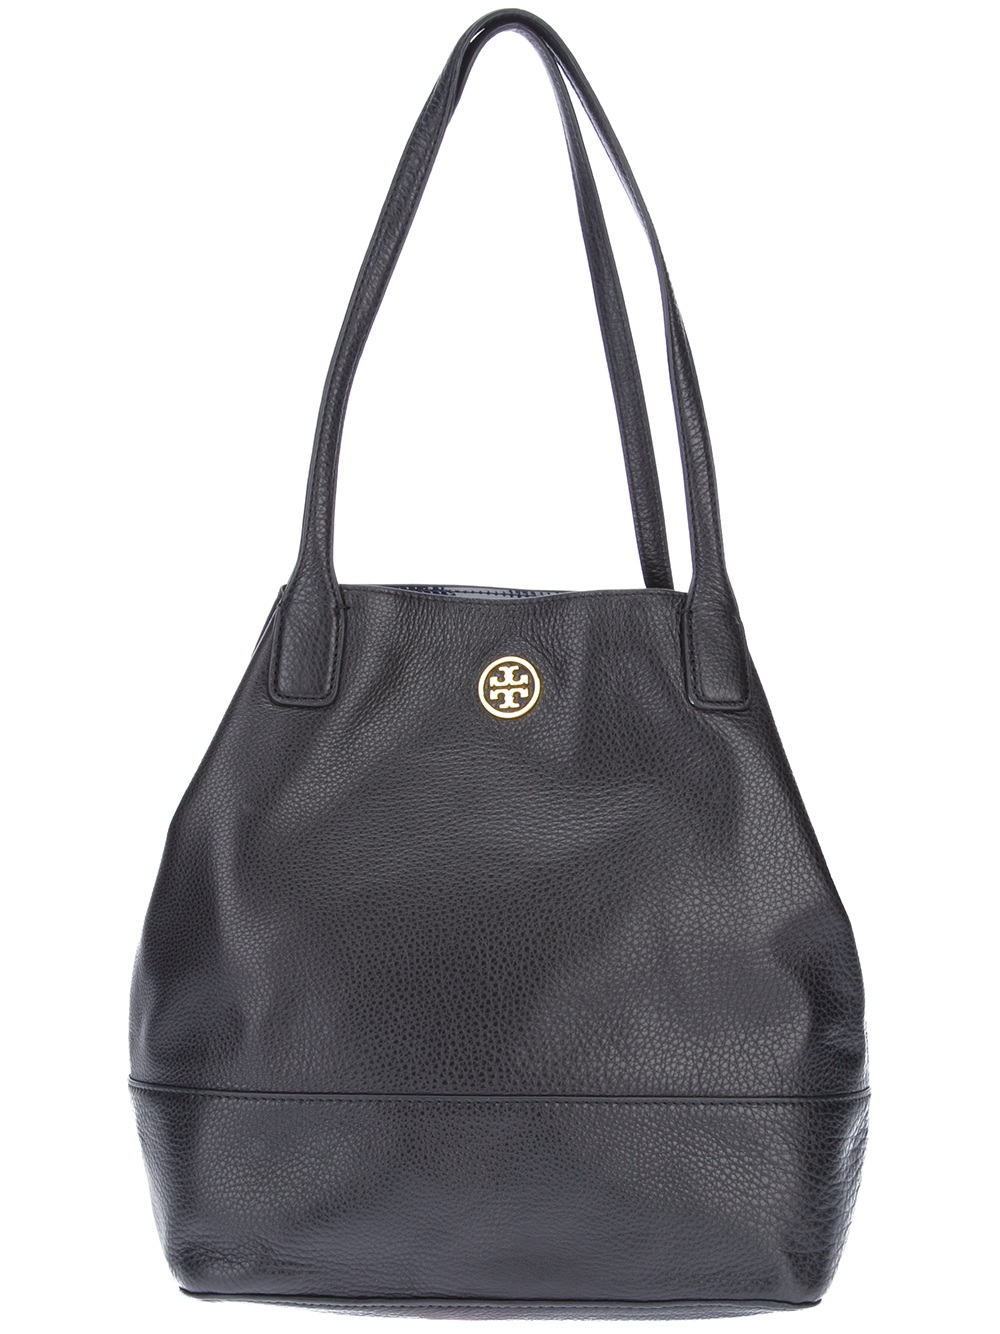 Tory Burch Michelle Small Tote Bag in Black | Lyst